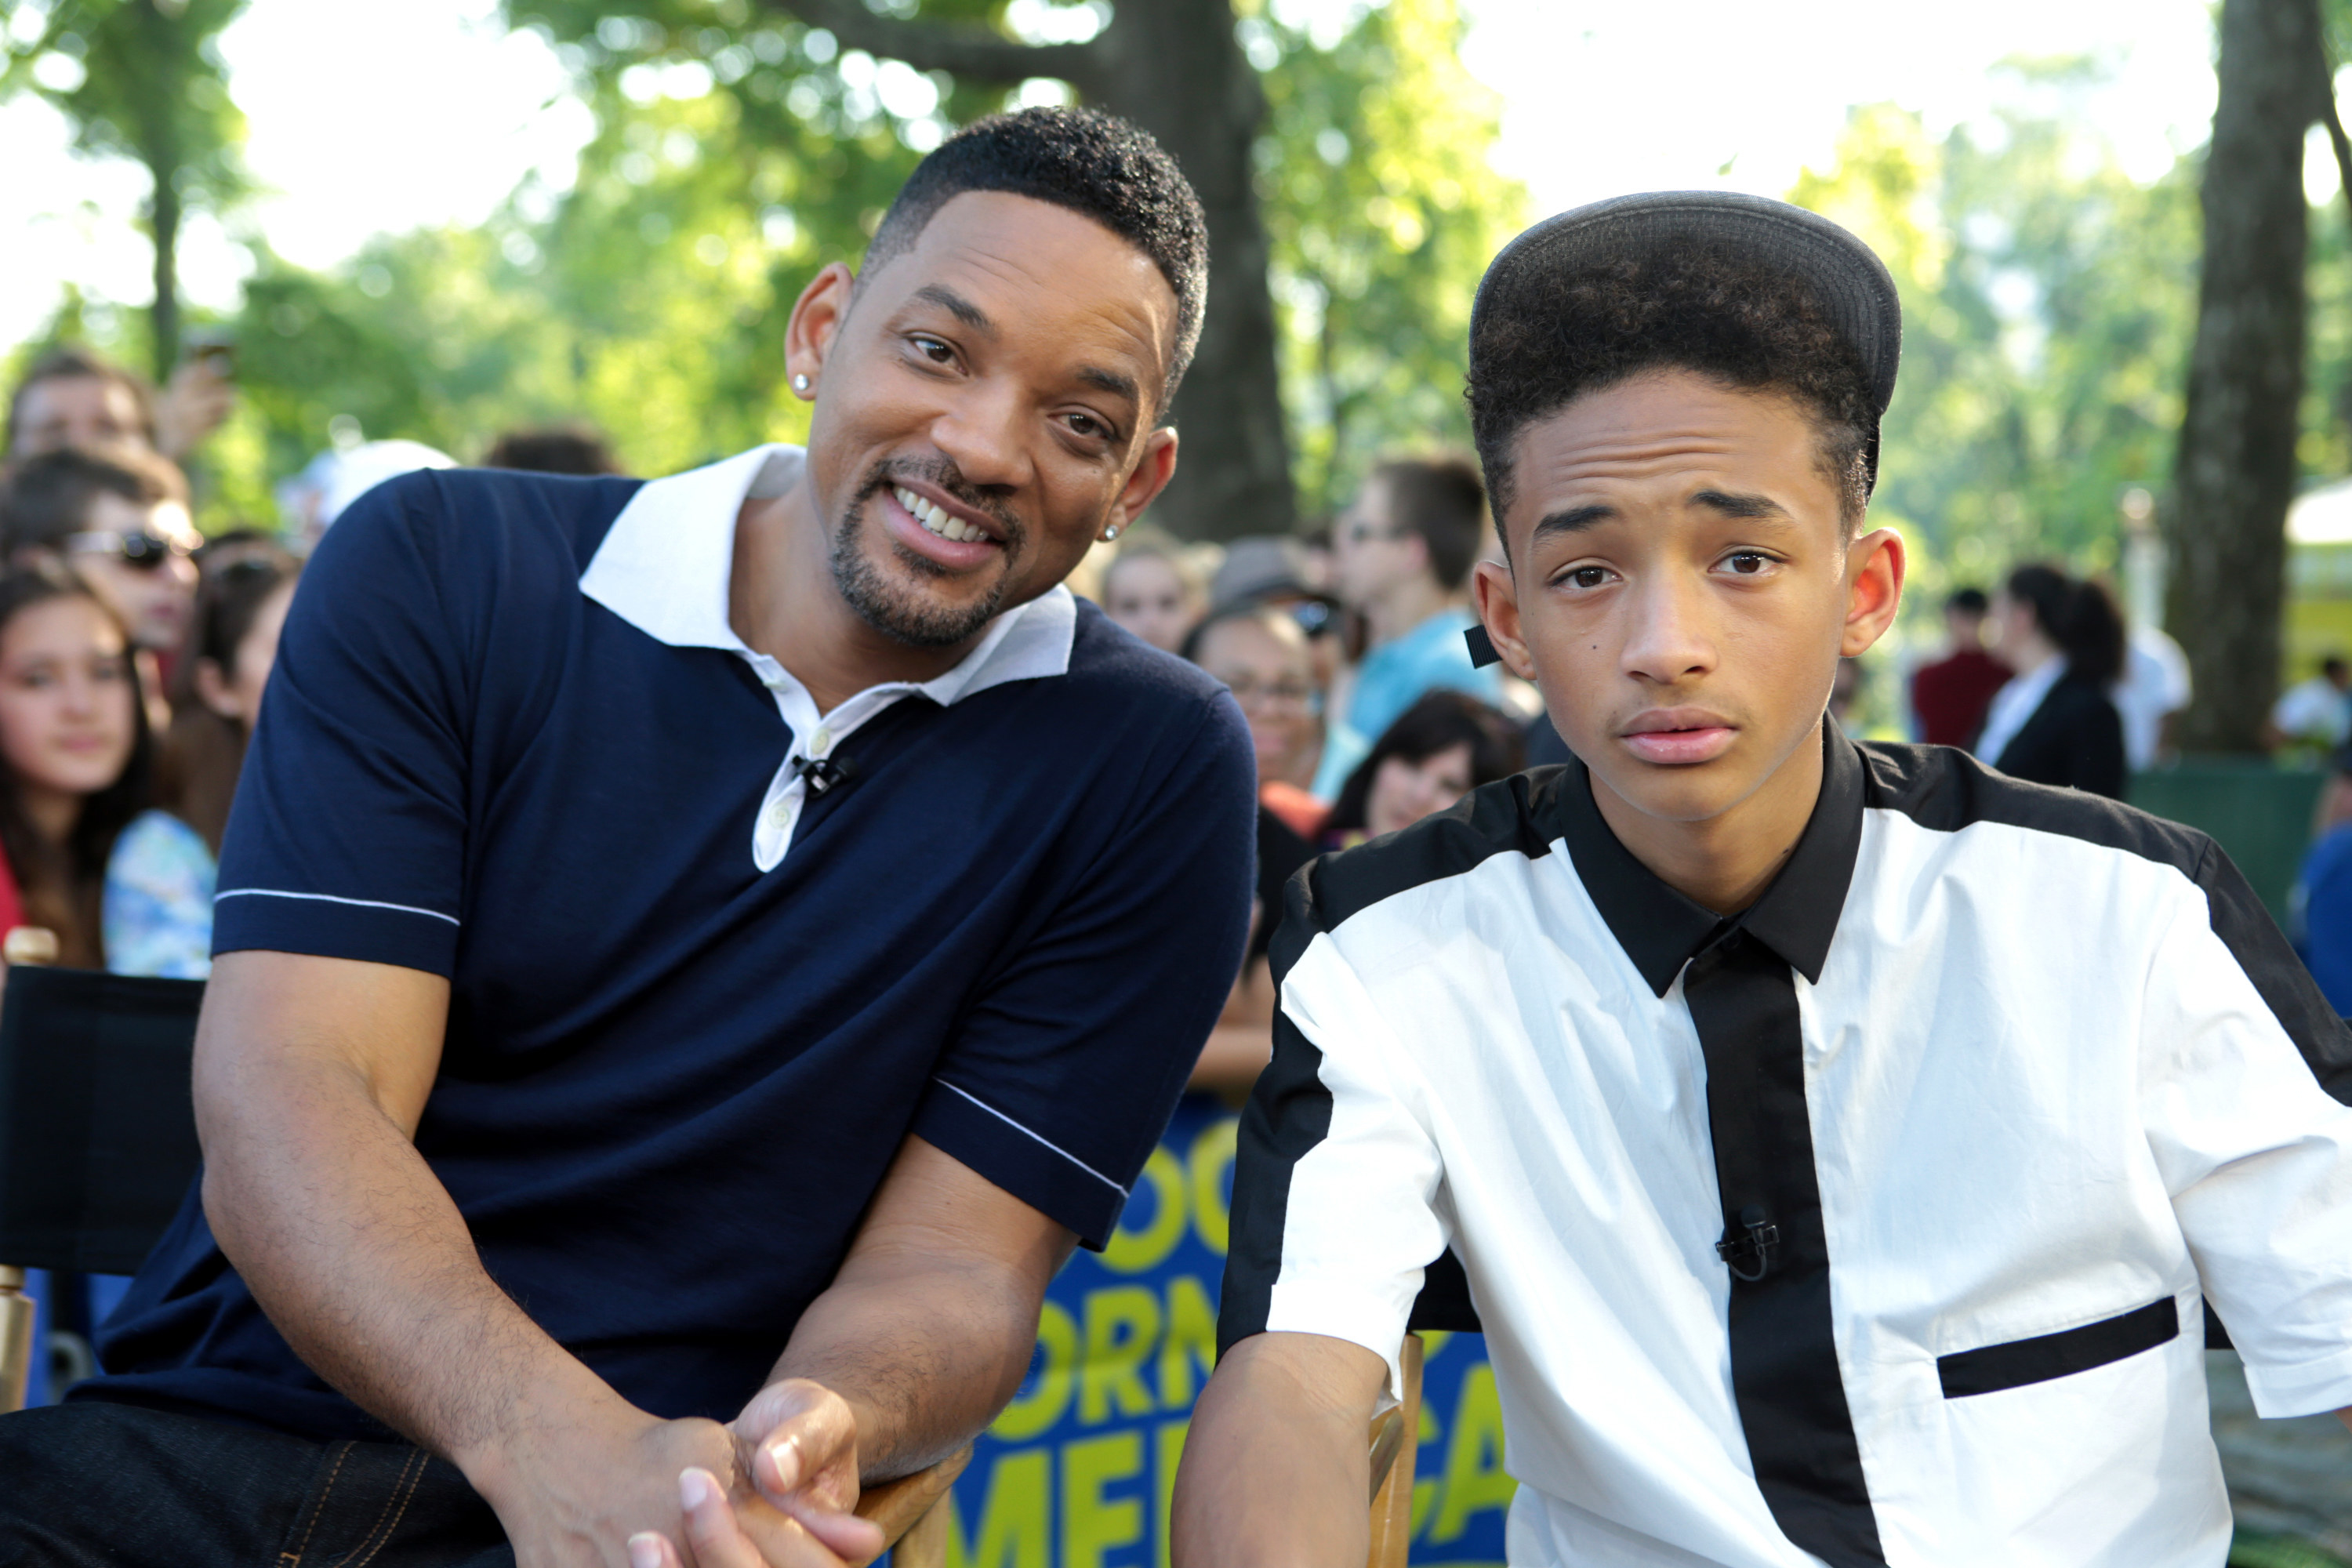 Will Smith Asks Son Jaden Why He Doesn't Have Kids in Playful Post